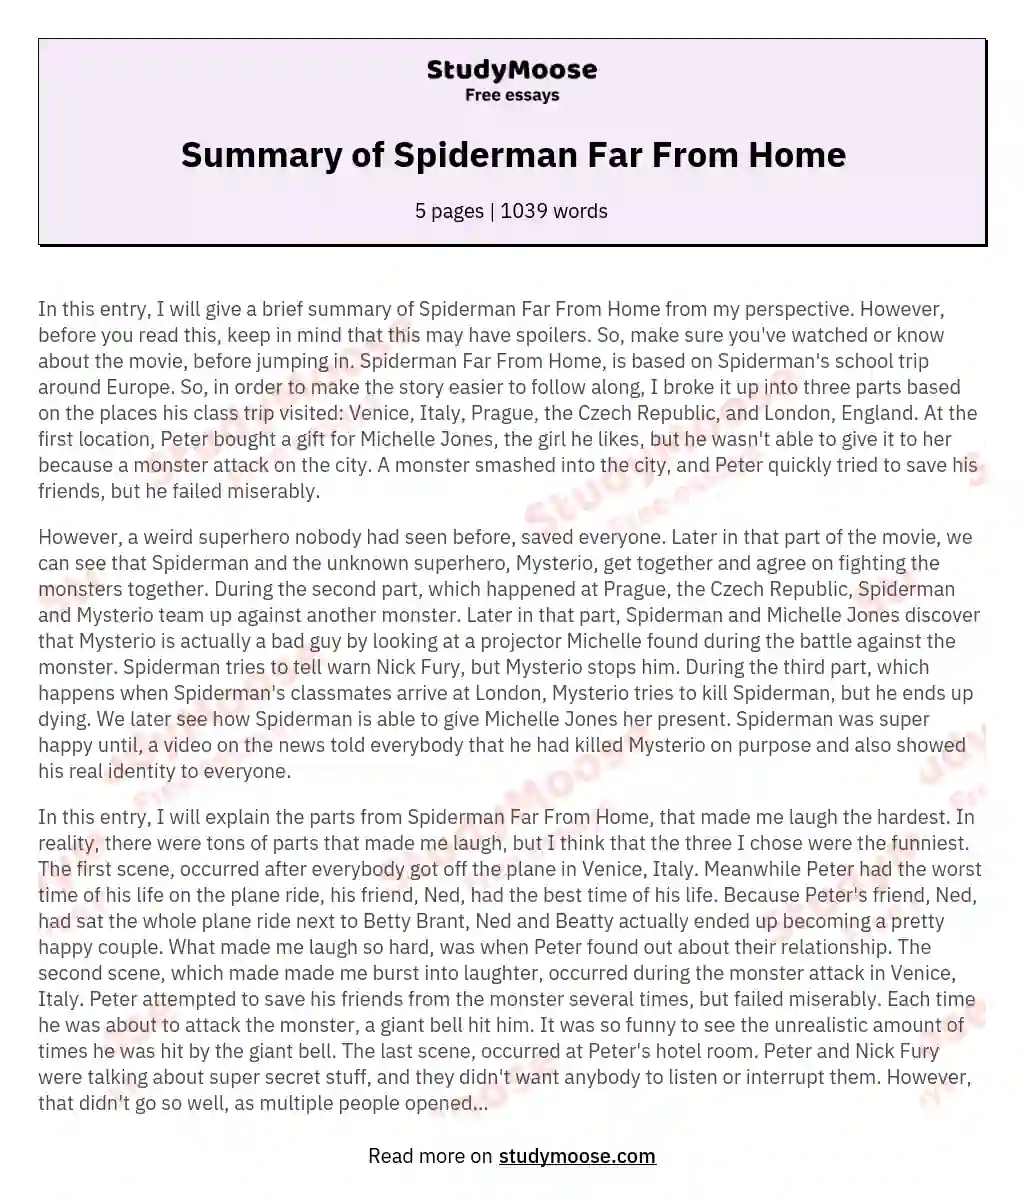 Summary of Spiderman Far From Home essay